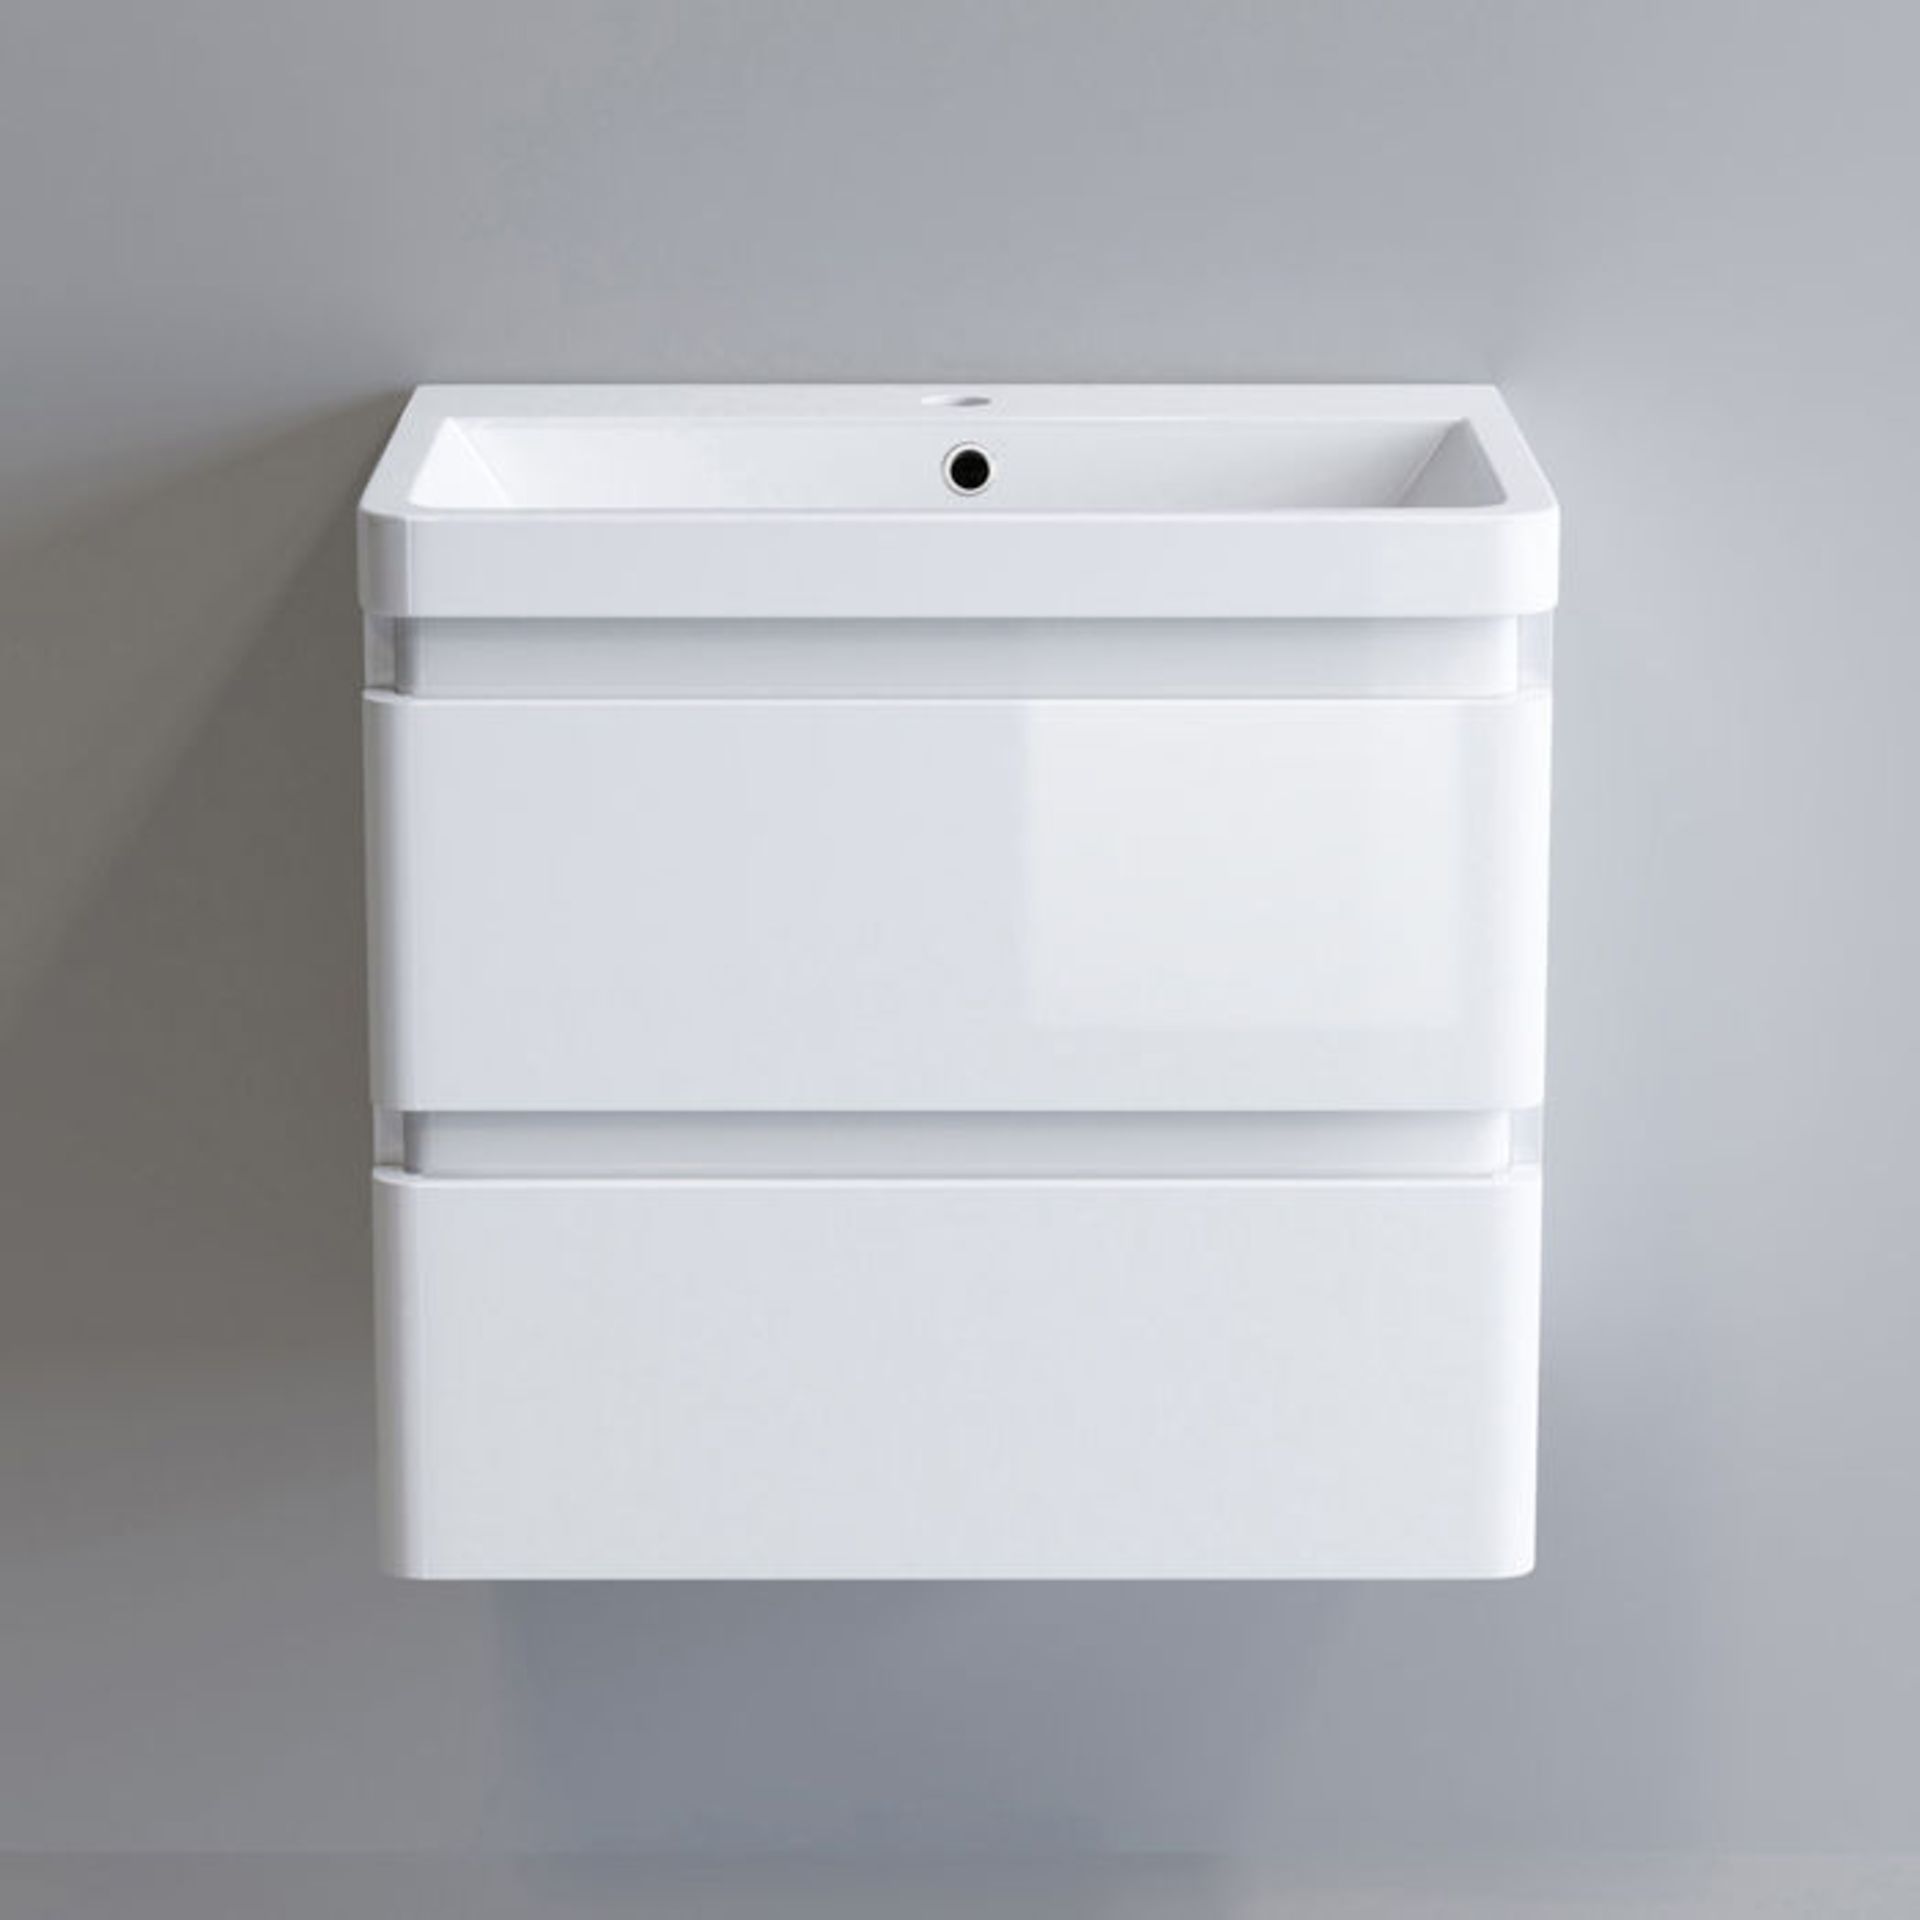 (GR19) 600mm Denver II Gloss White Built In Basin Drawer Unit - Wall Hung RRP £499.99. COMES - Image 4 of 5